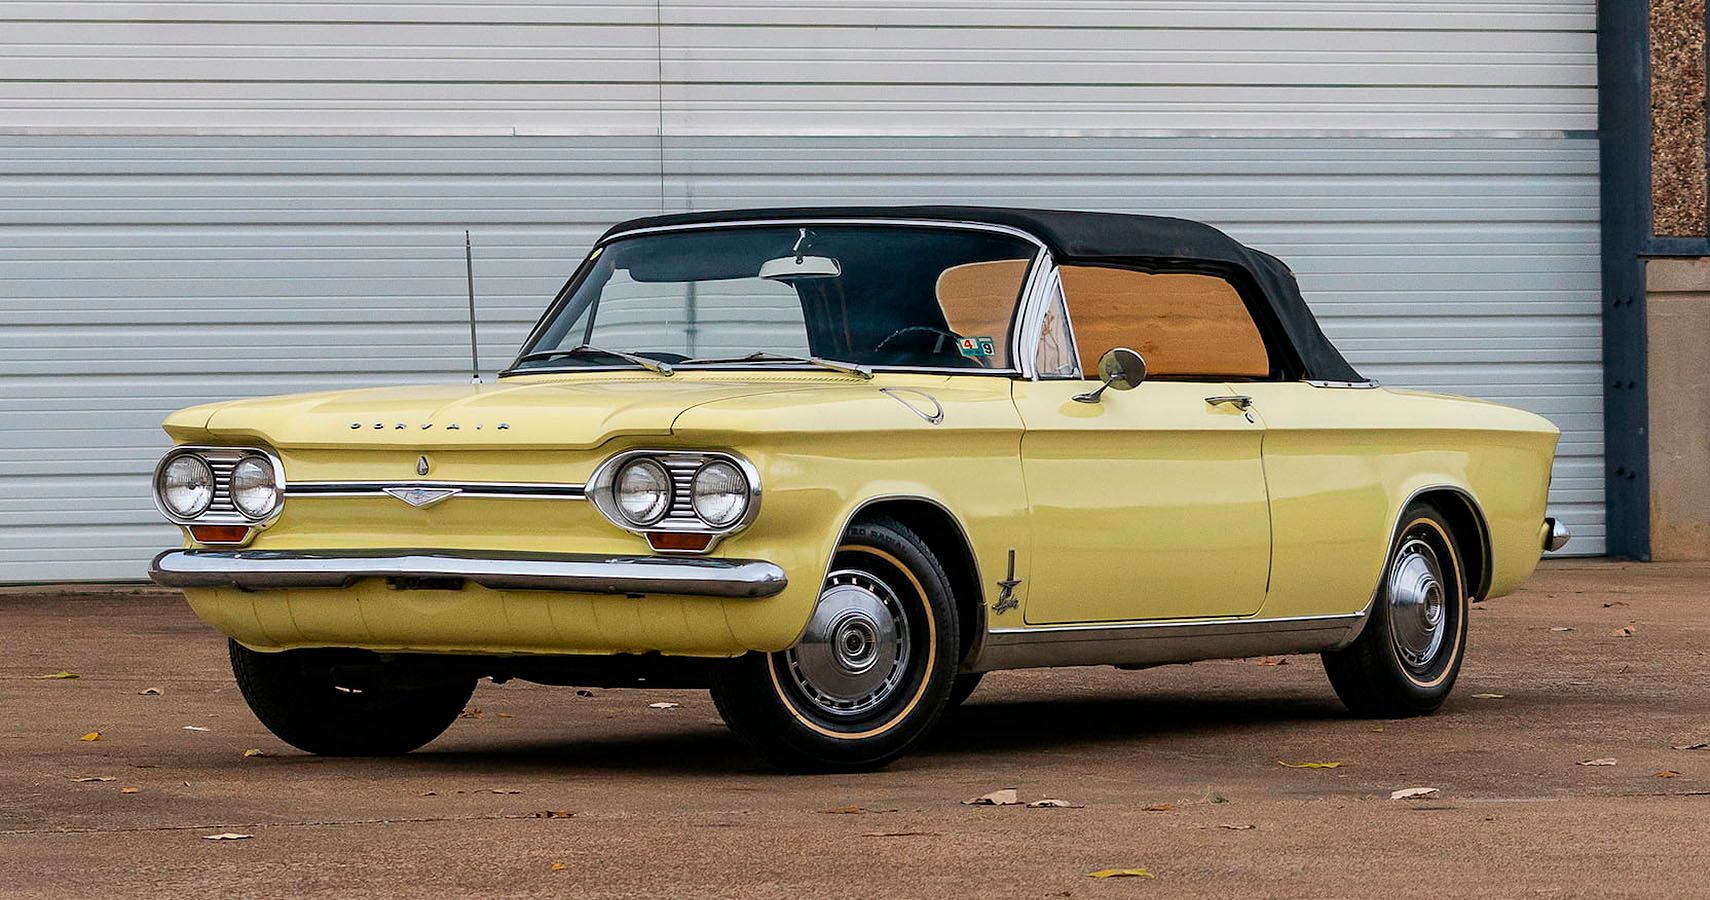 Chevrolet Decided To Up The Sporty Game By Introducing The Chevrolet Corvair Monza Spyder, A Convertible With A Turbocharged Engine That Made 150 Horses – Giving A Respectable Performance For Little Monies